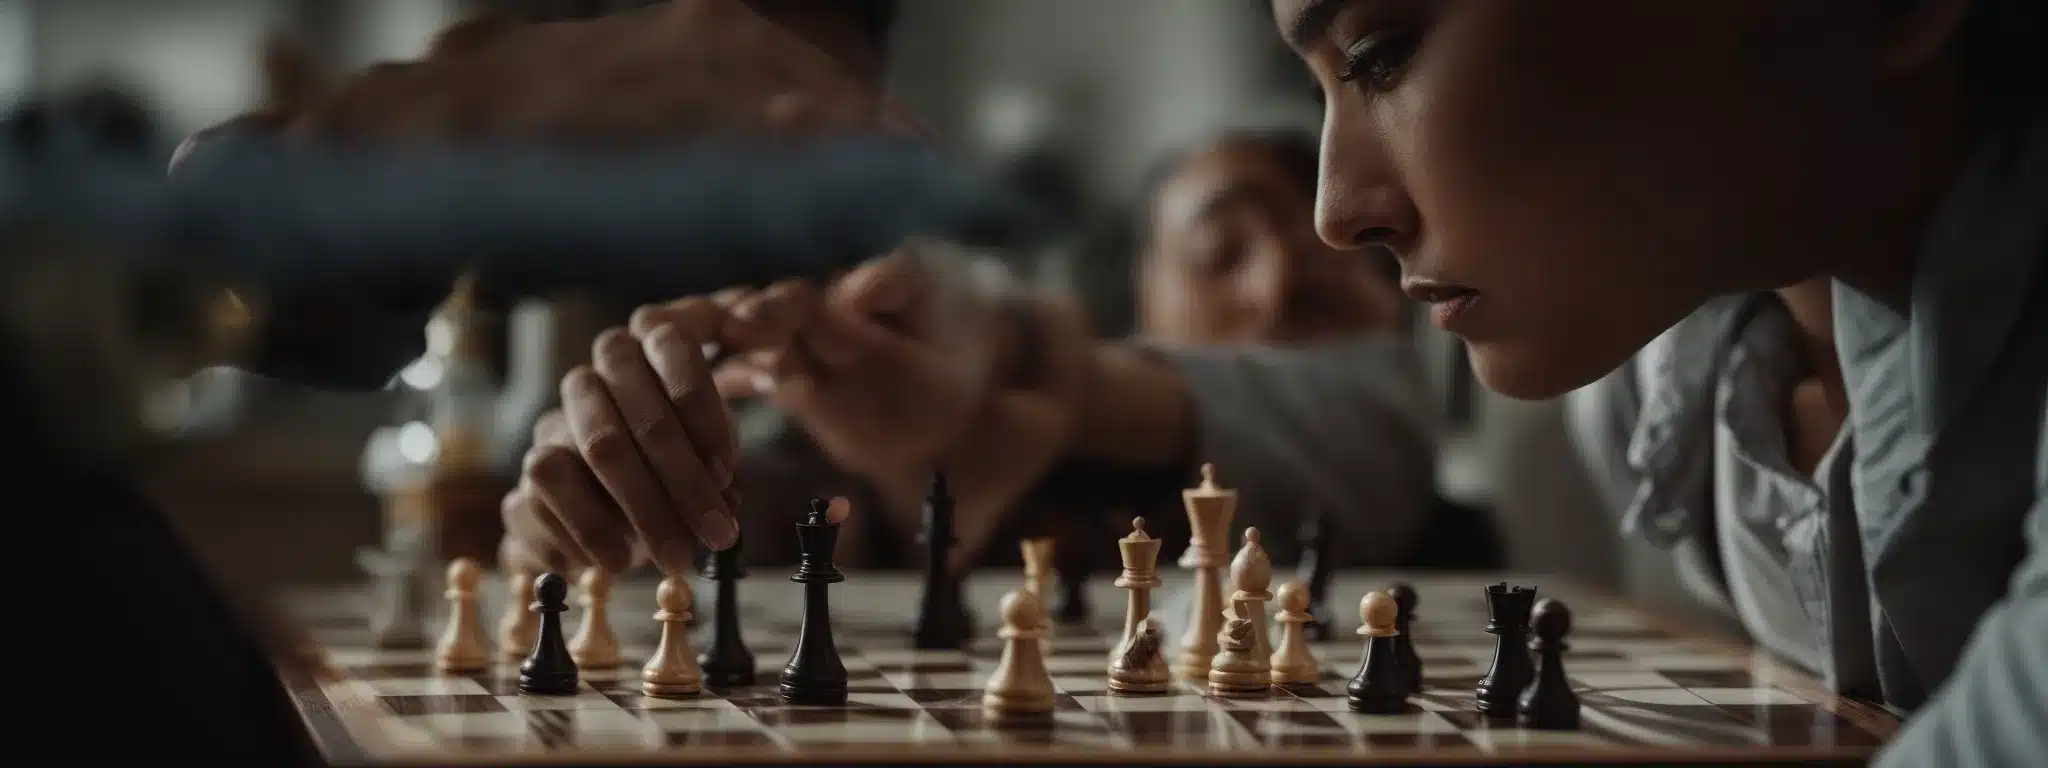 An Intense Gaze Settles On A Chessboard Where Every Move Is A Strategic Play For Advantage, Symbolizing The Cerebral Game Of Competitor Brand Analysis.